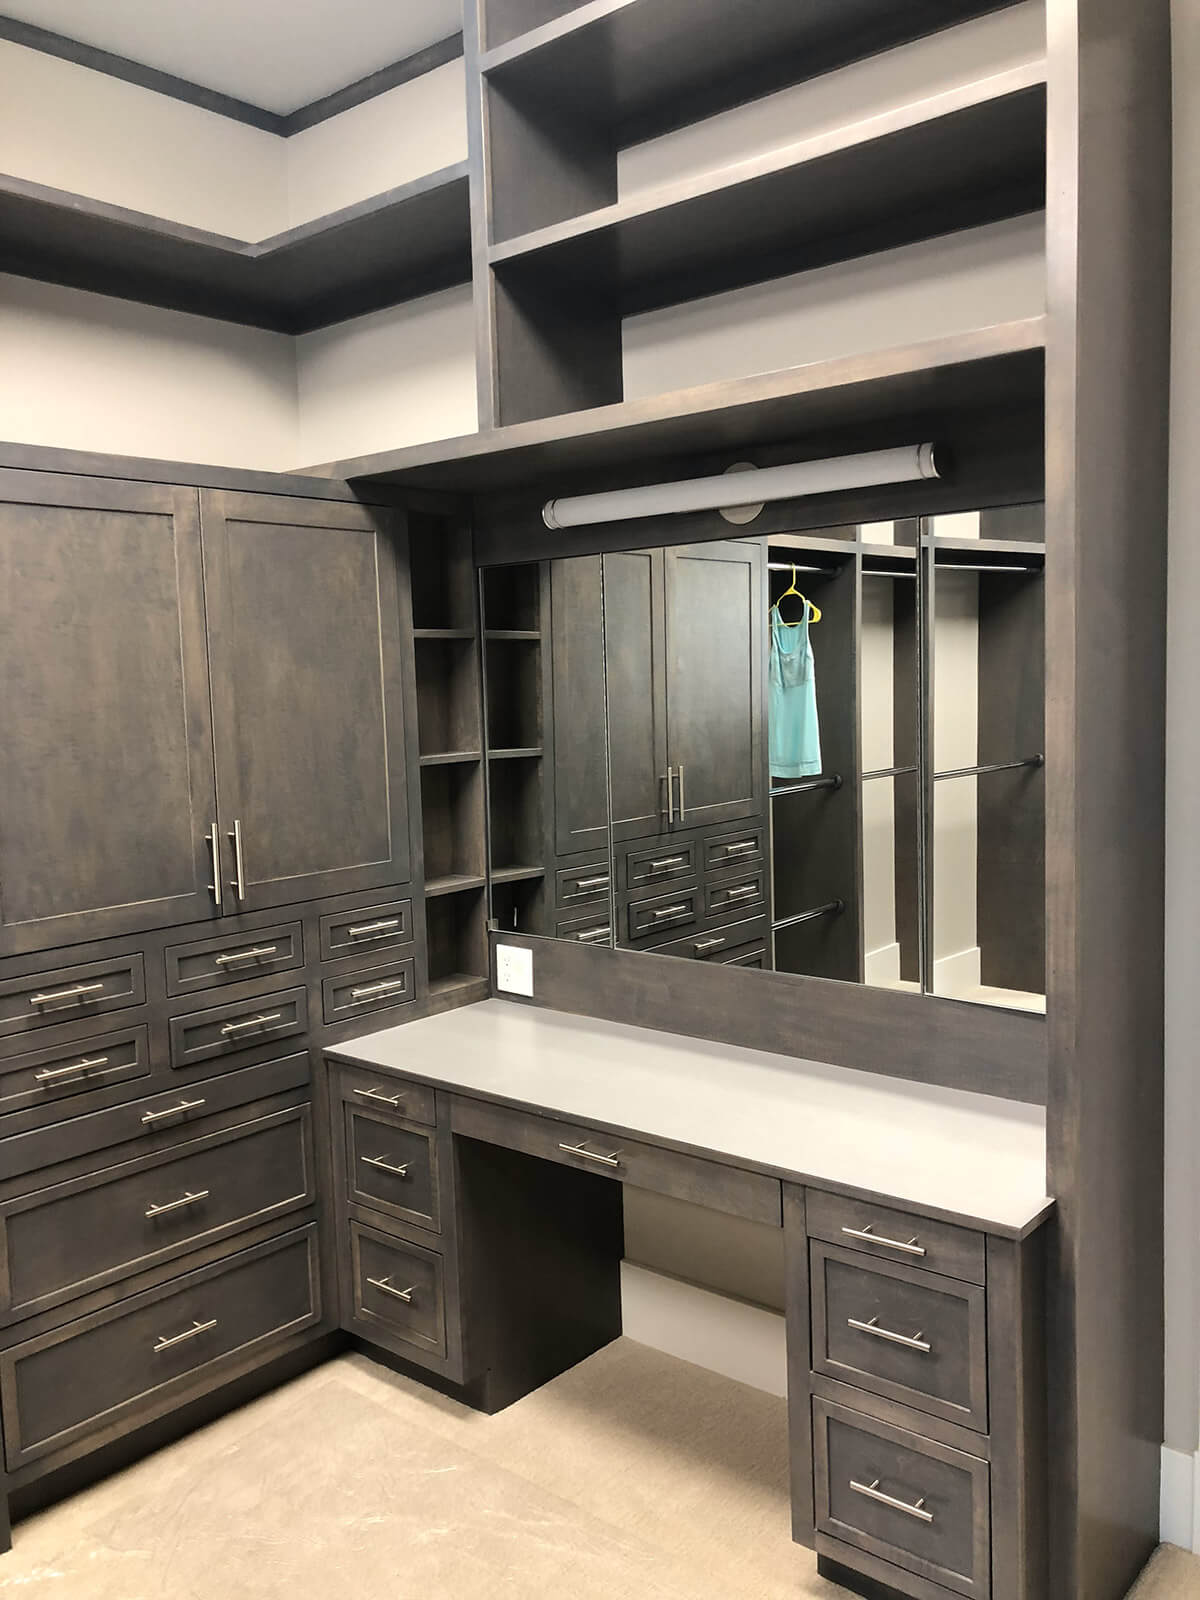 Large closet with many cabinets and a vanity.